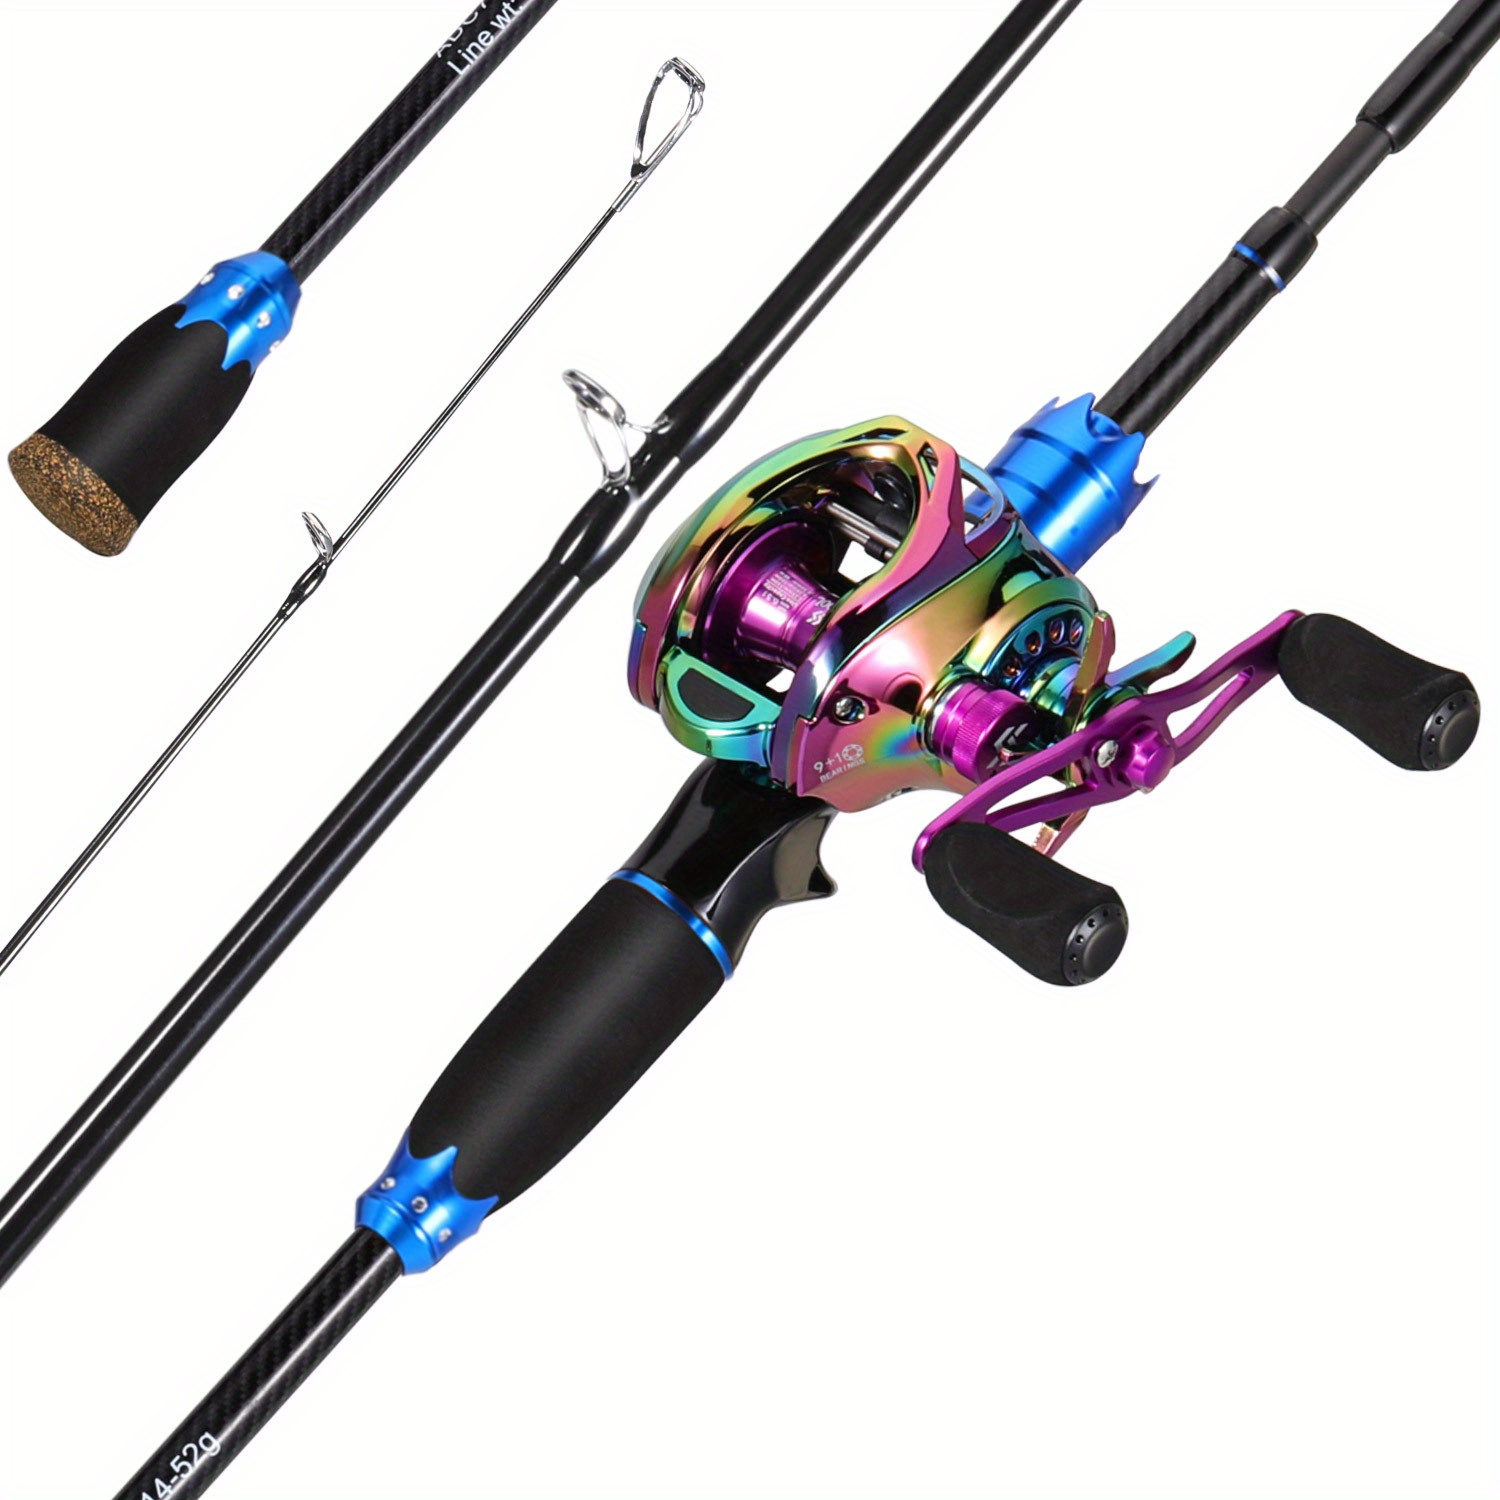 Ardent fishouflage baitcast combo - Fishing Rods, Reels, Line, and